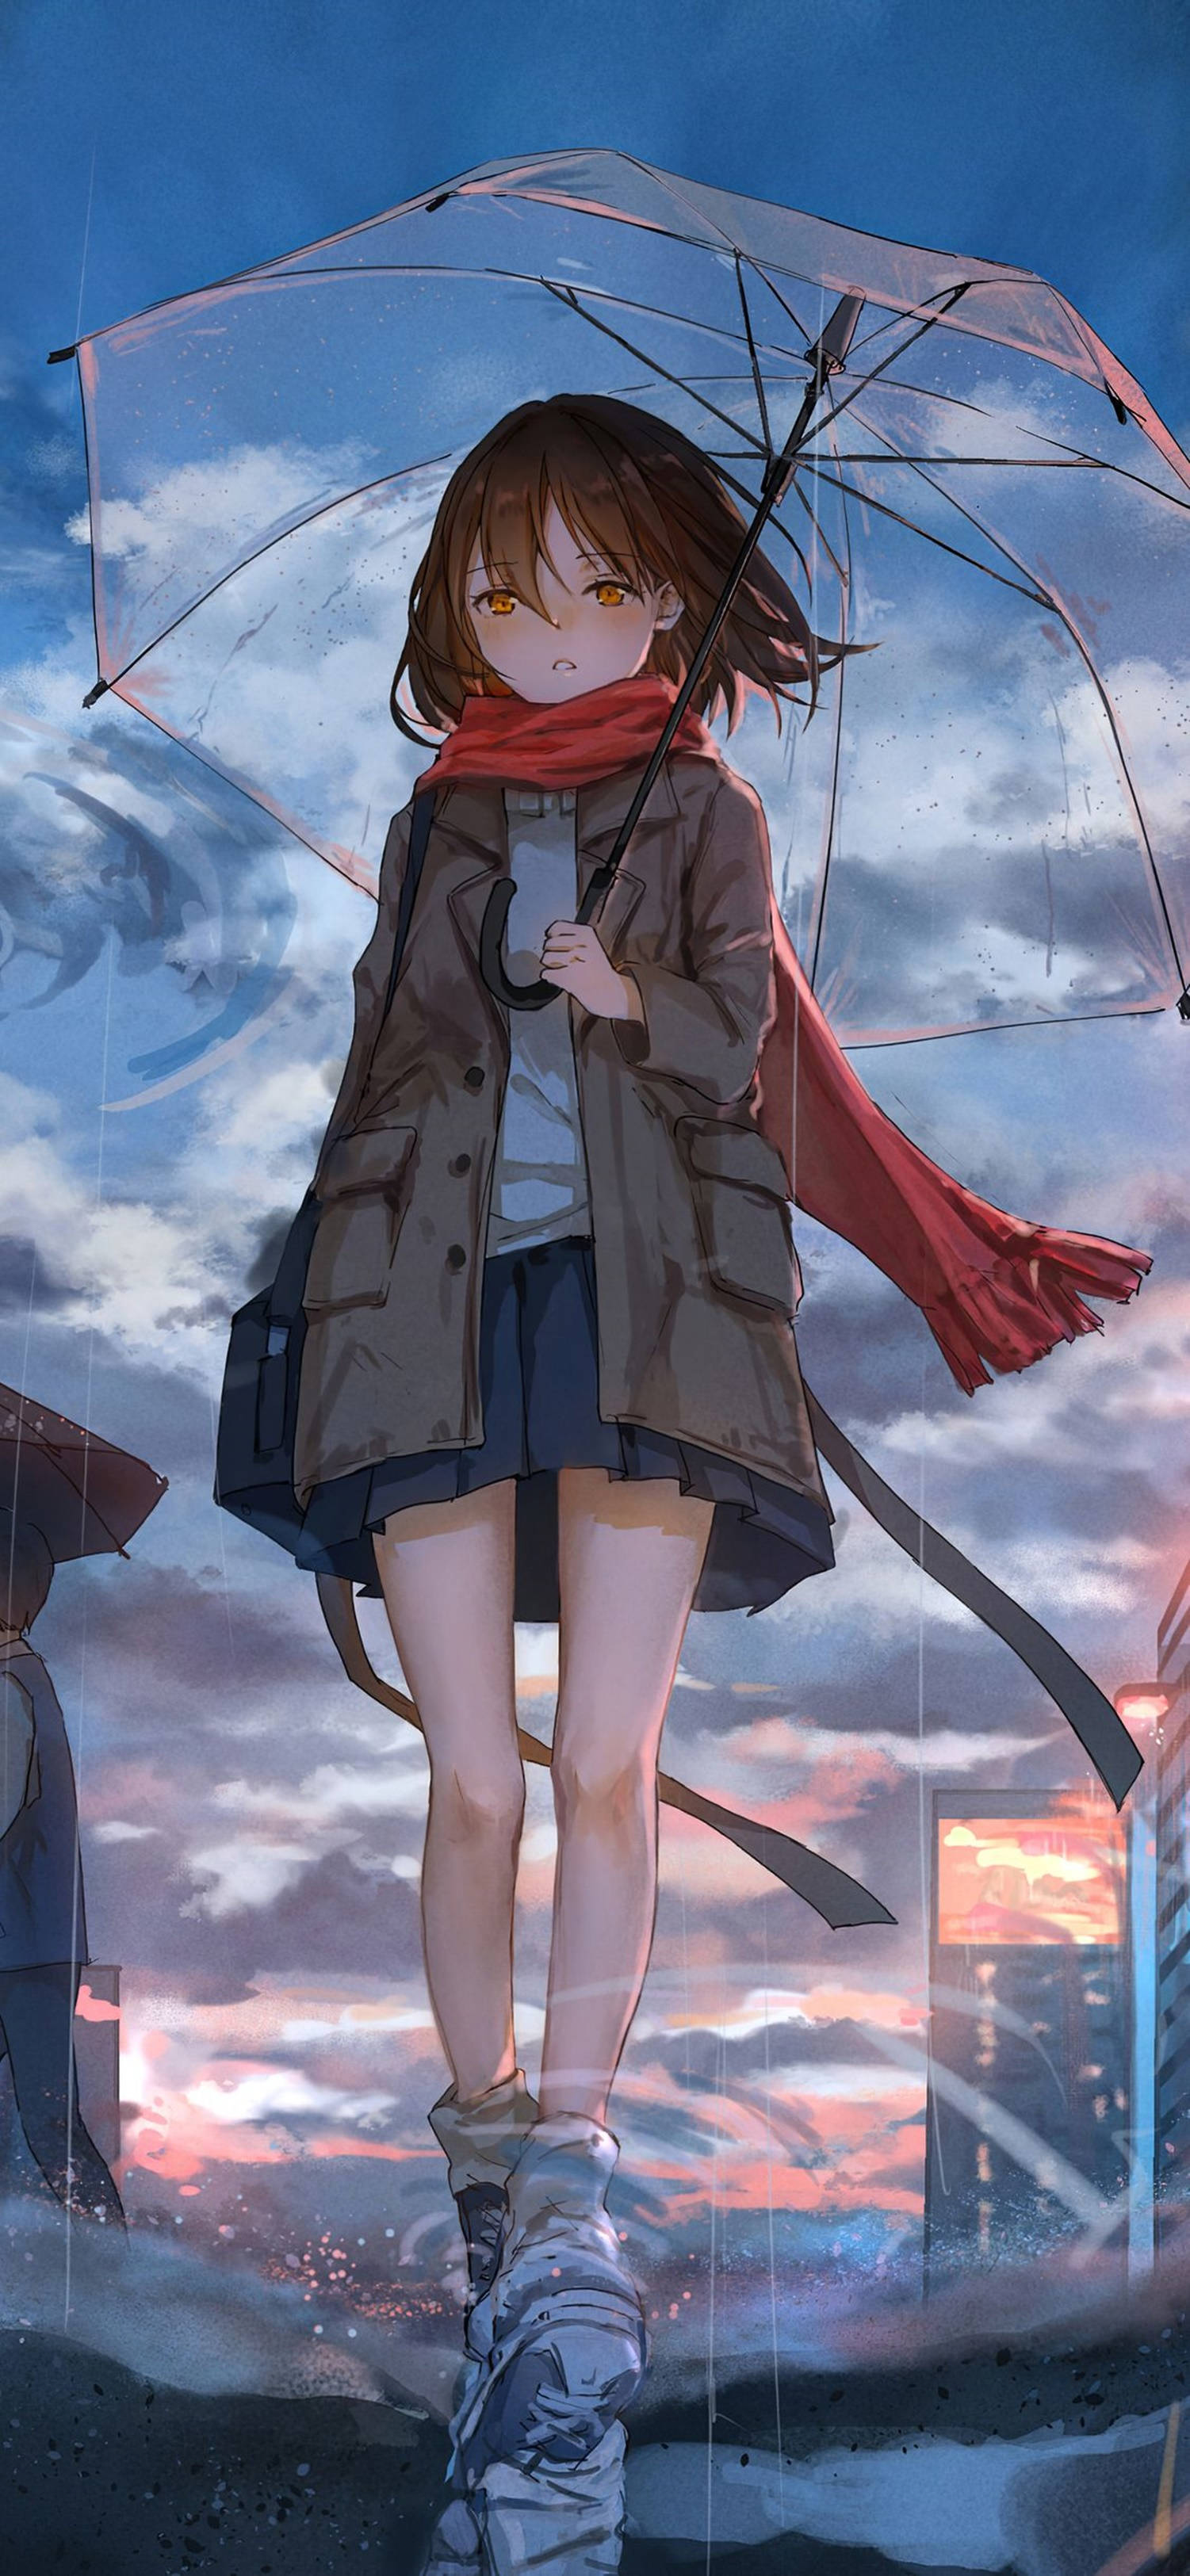 4k Anime Iphone Girl With Red Scarf Wallpaper